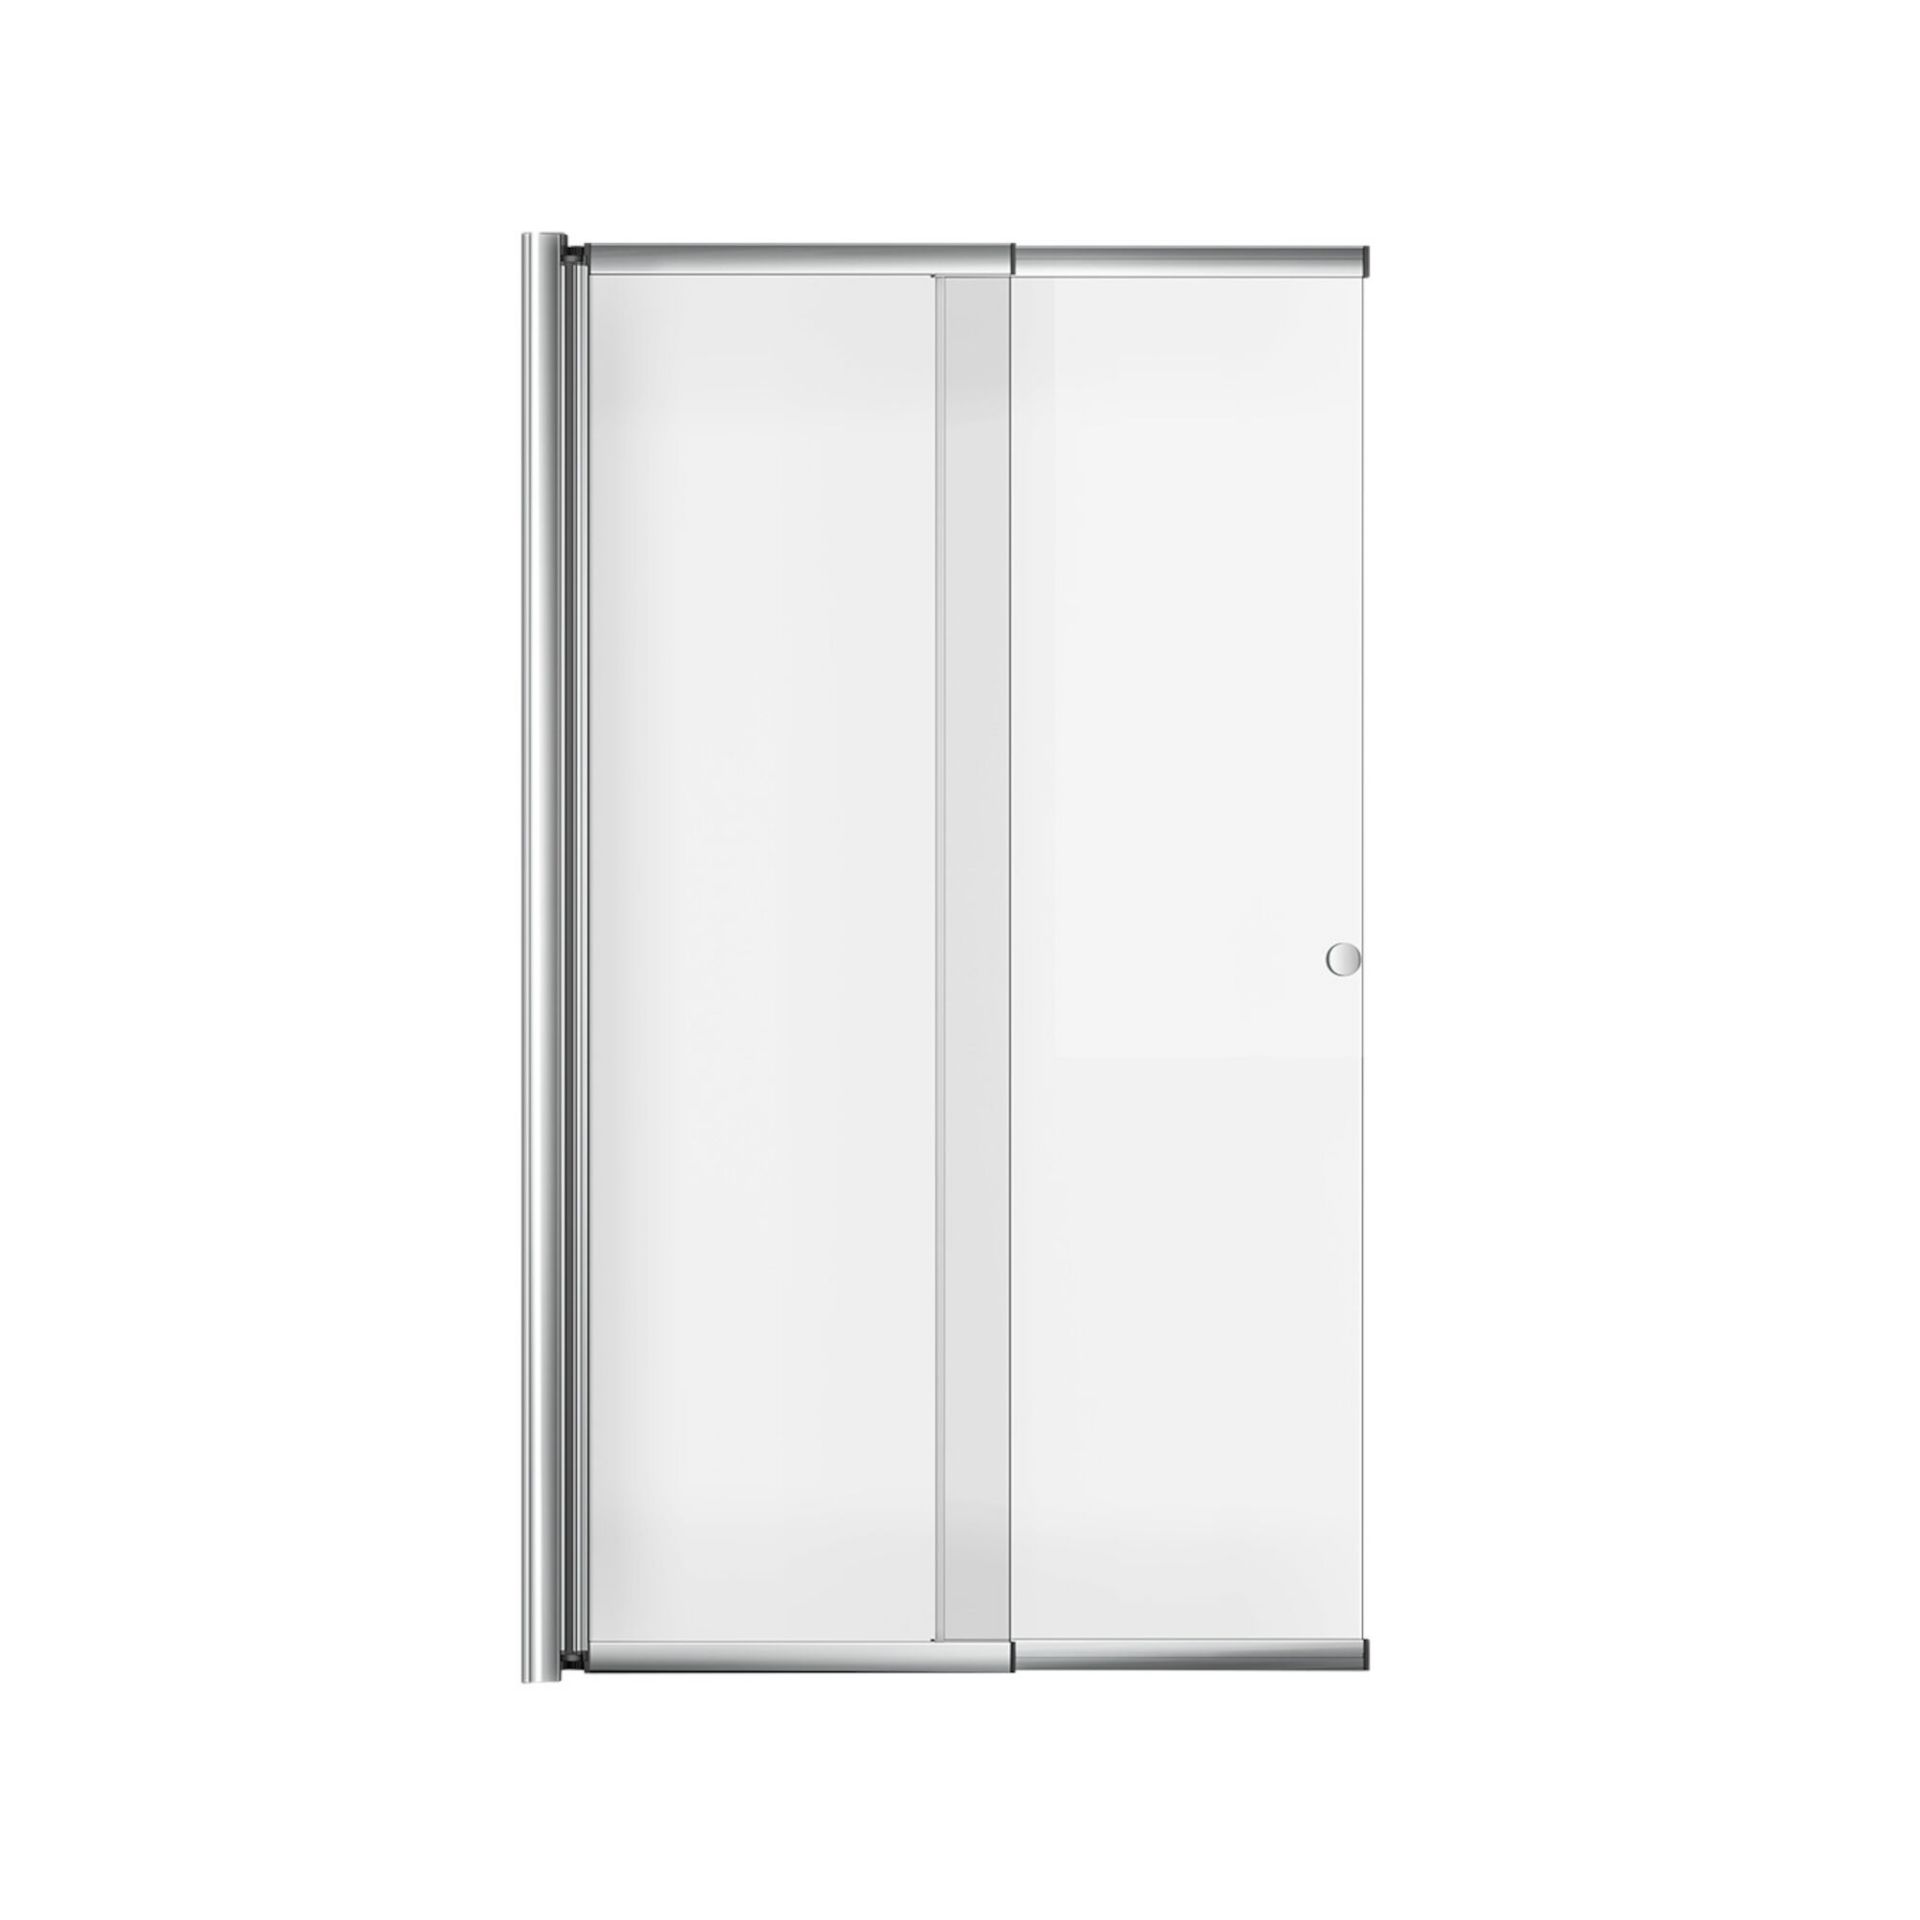 (EW169) 820mm Sliding Bath Screen. RRP £189.99. Constructed of 4mm lightweight tempered safety glass